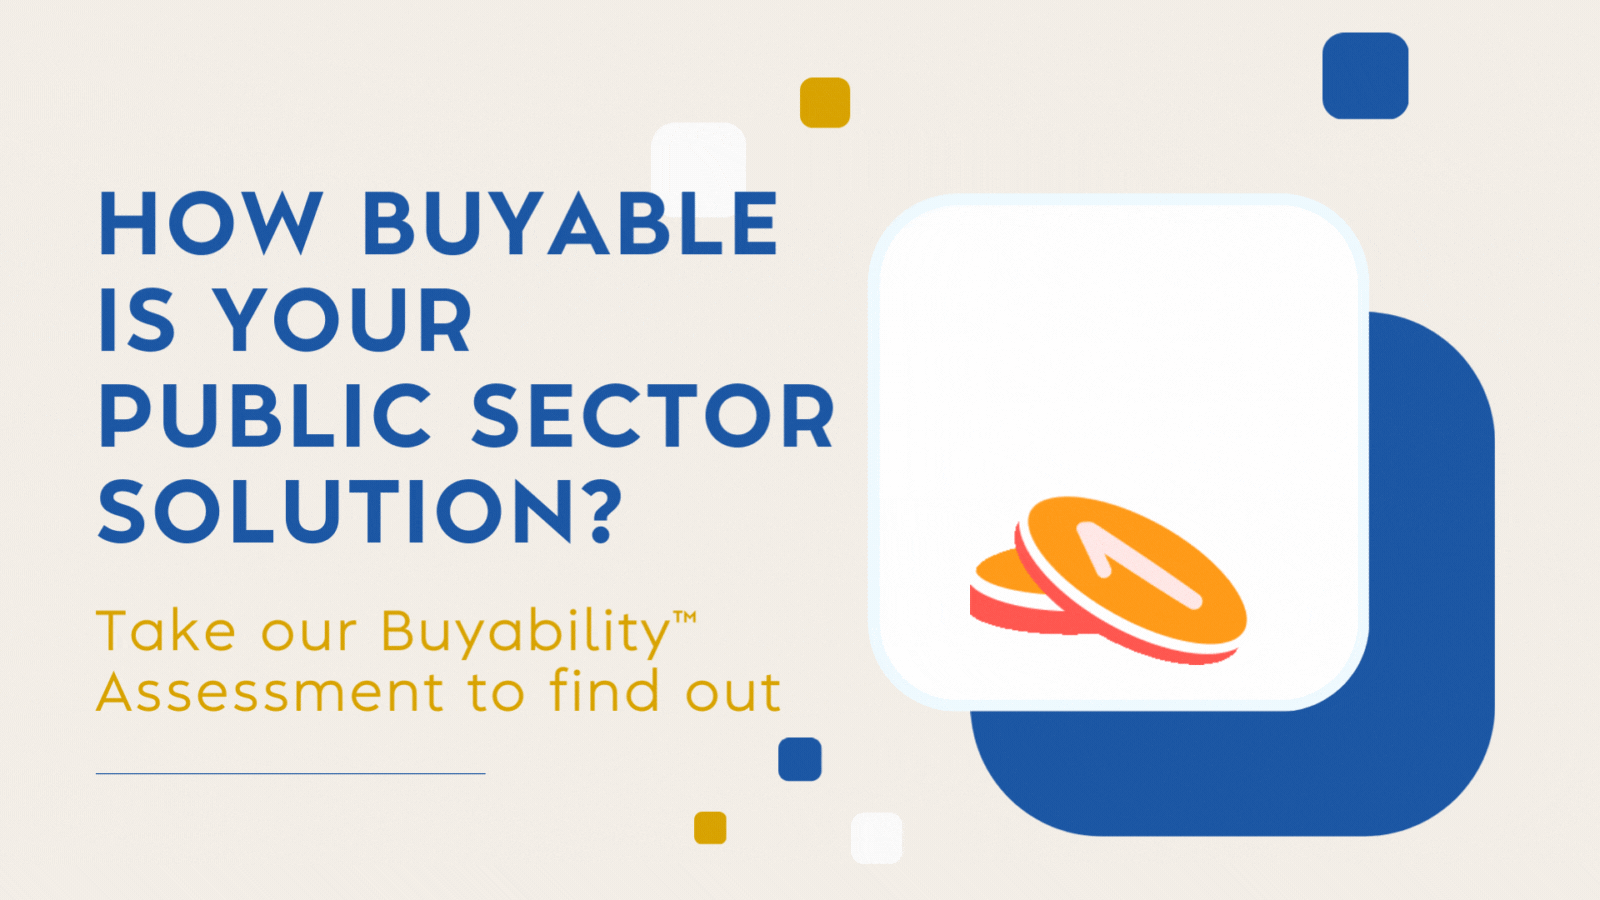 Click here to take our 3-minute Buyability Assessment